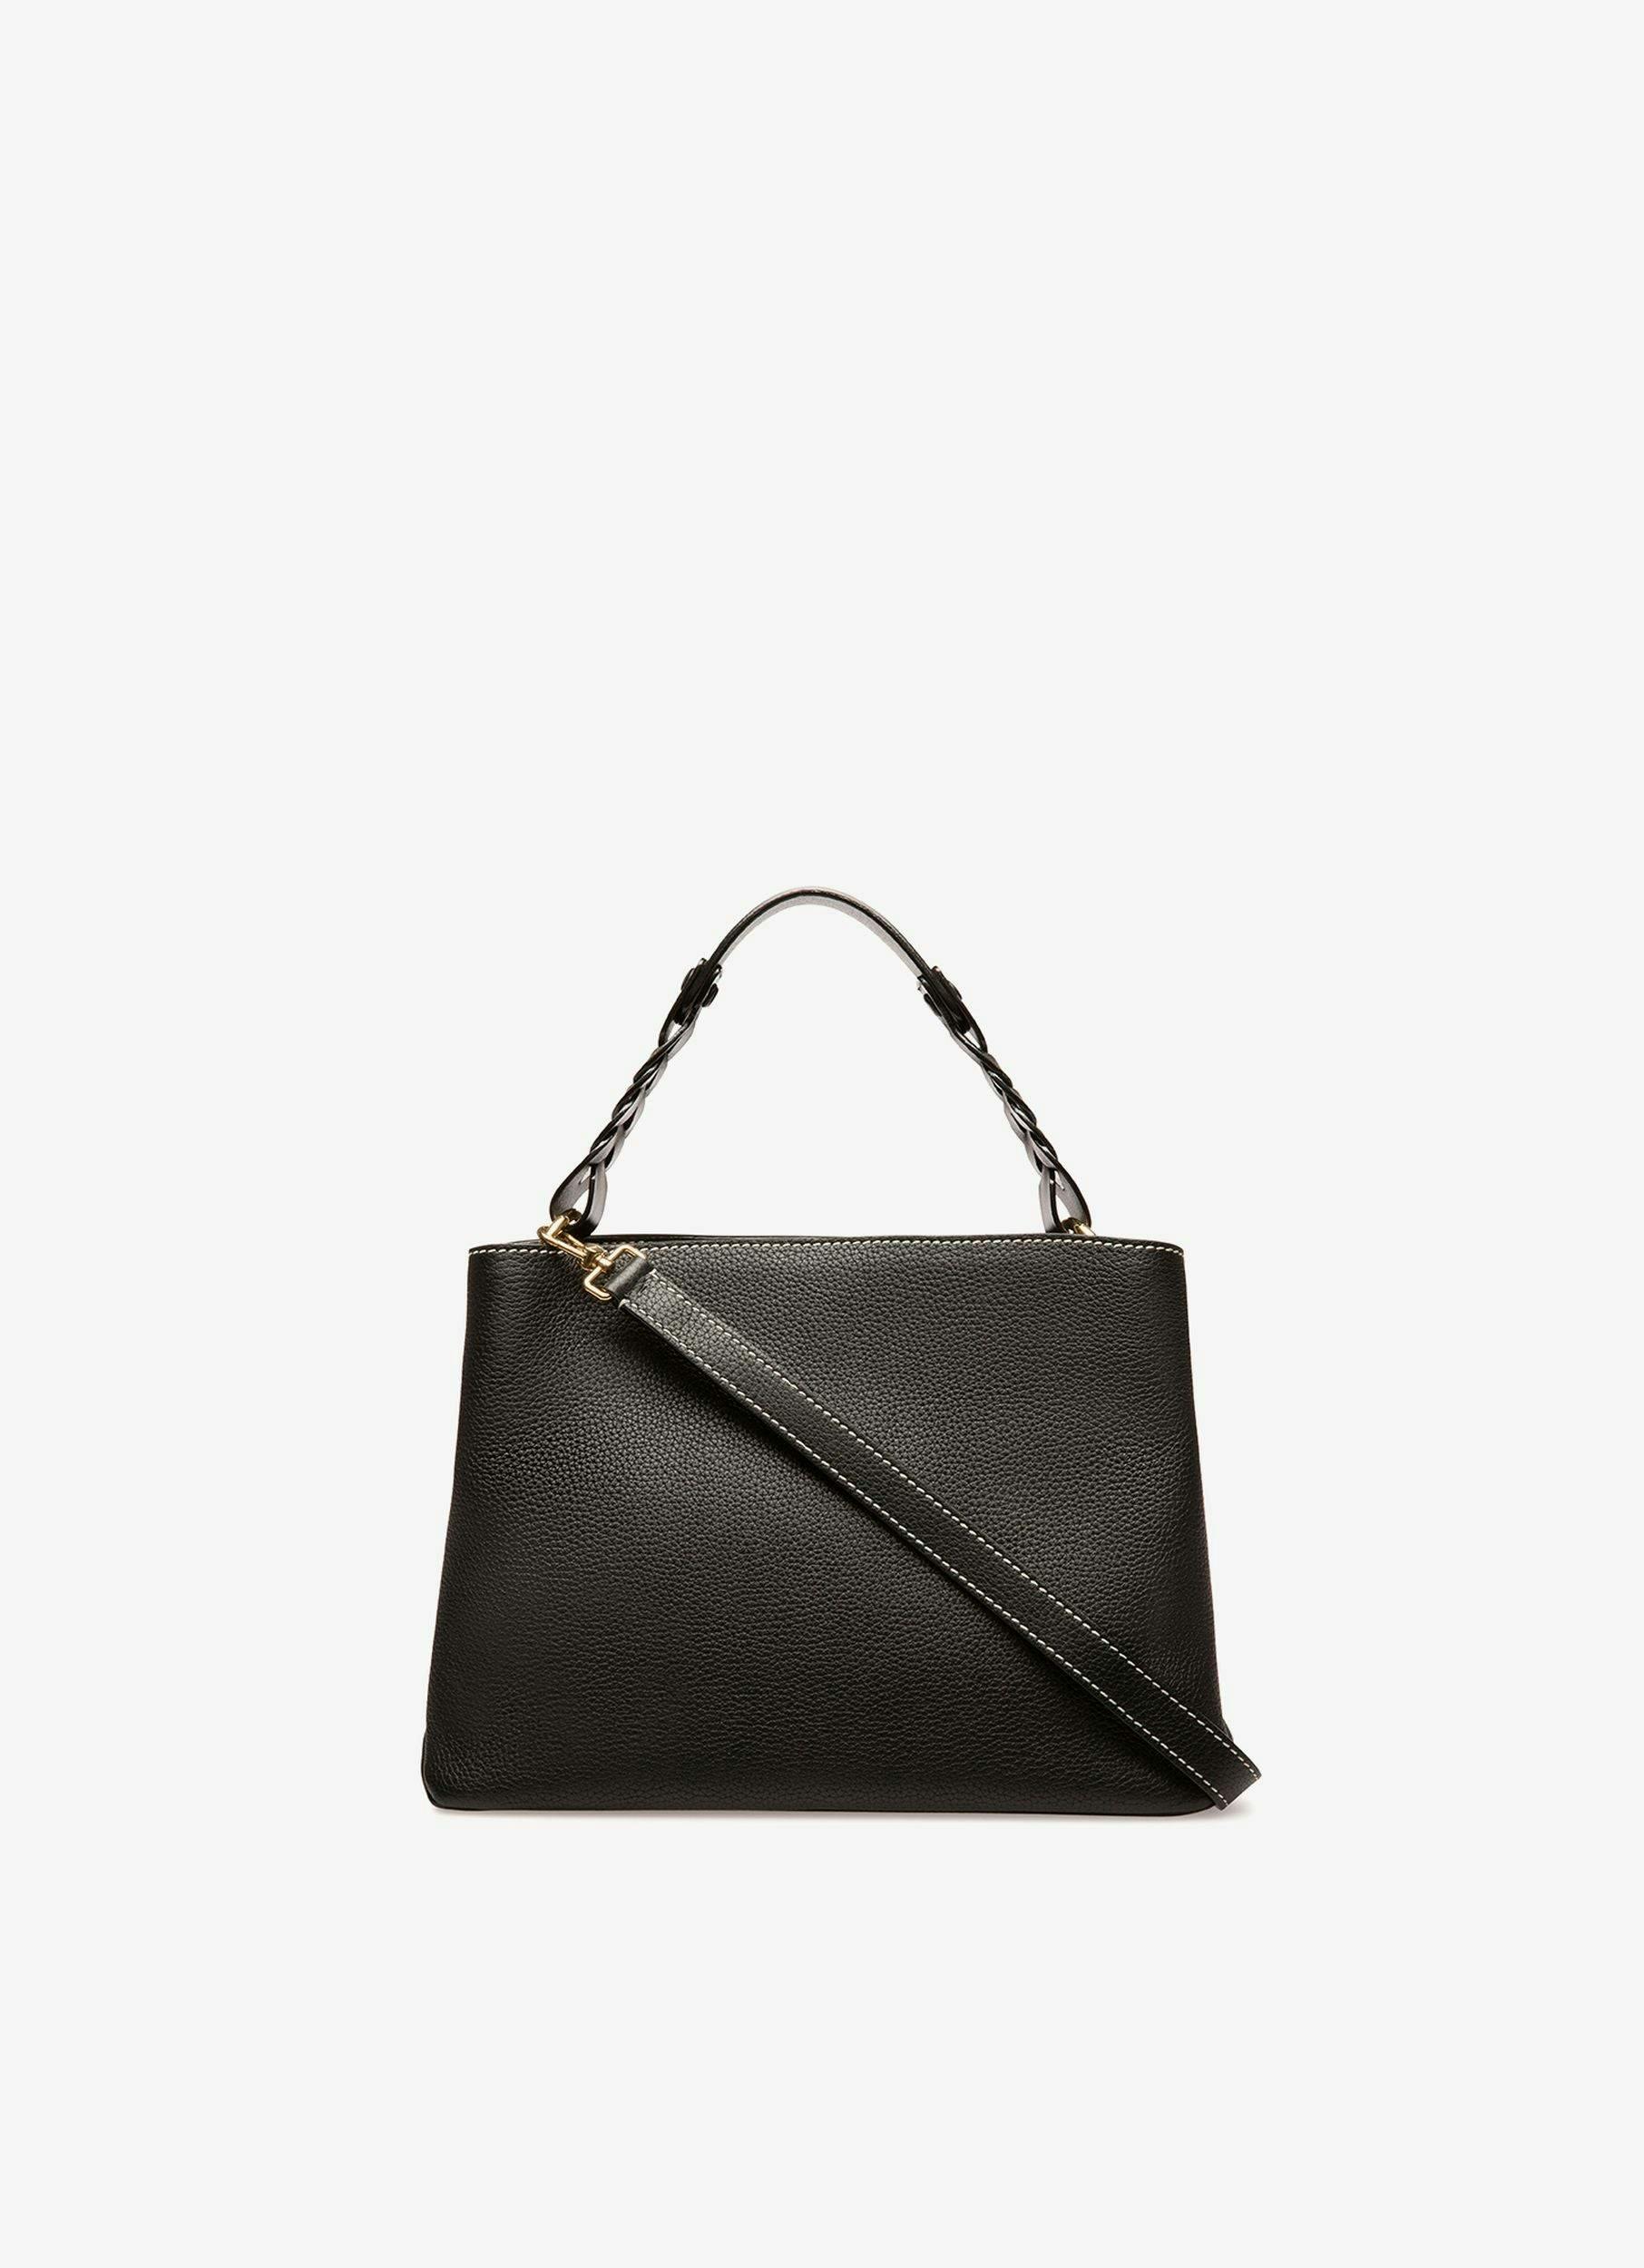 Lucyle Leather Shoulder Bag In Black - Women's - Bally - 03